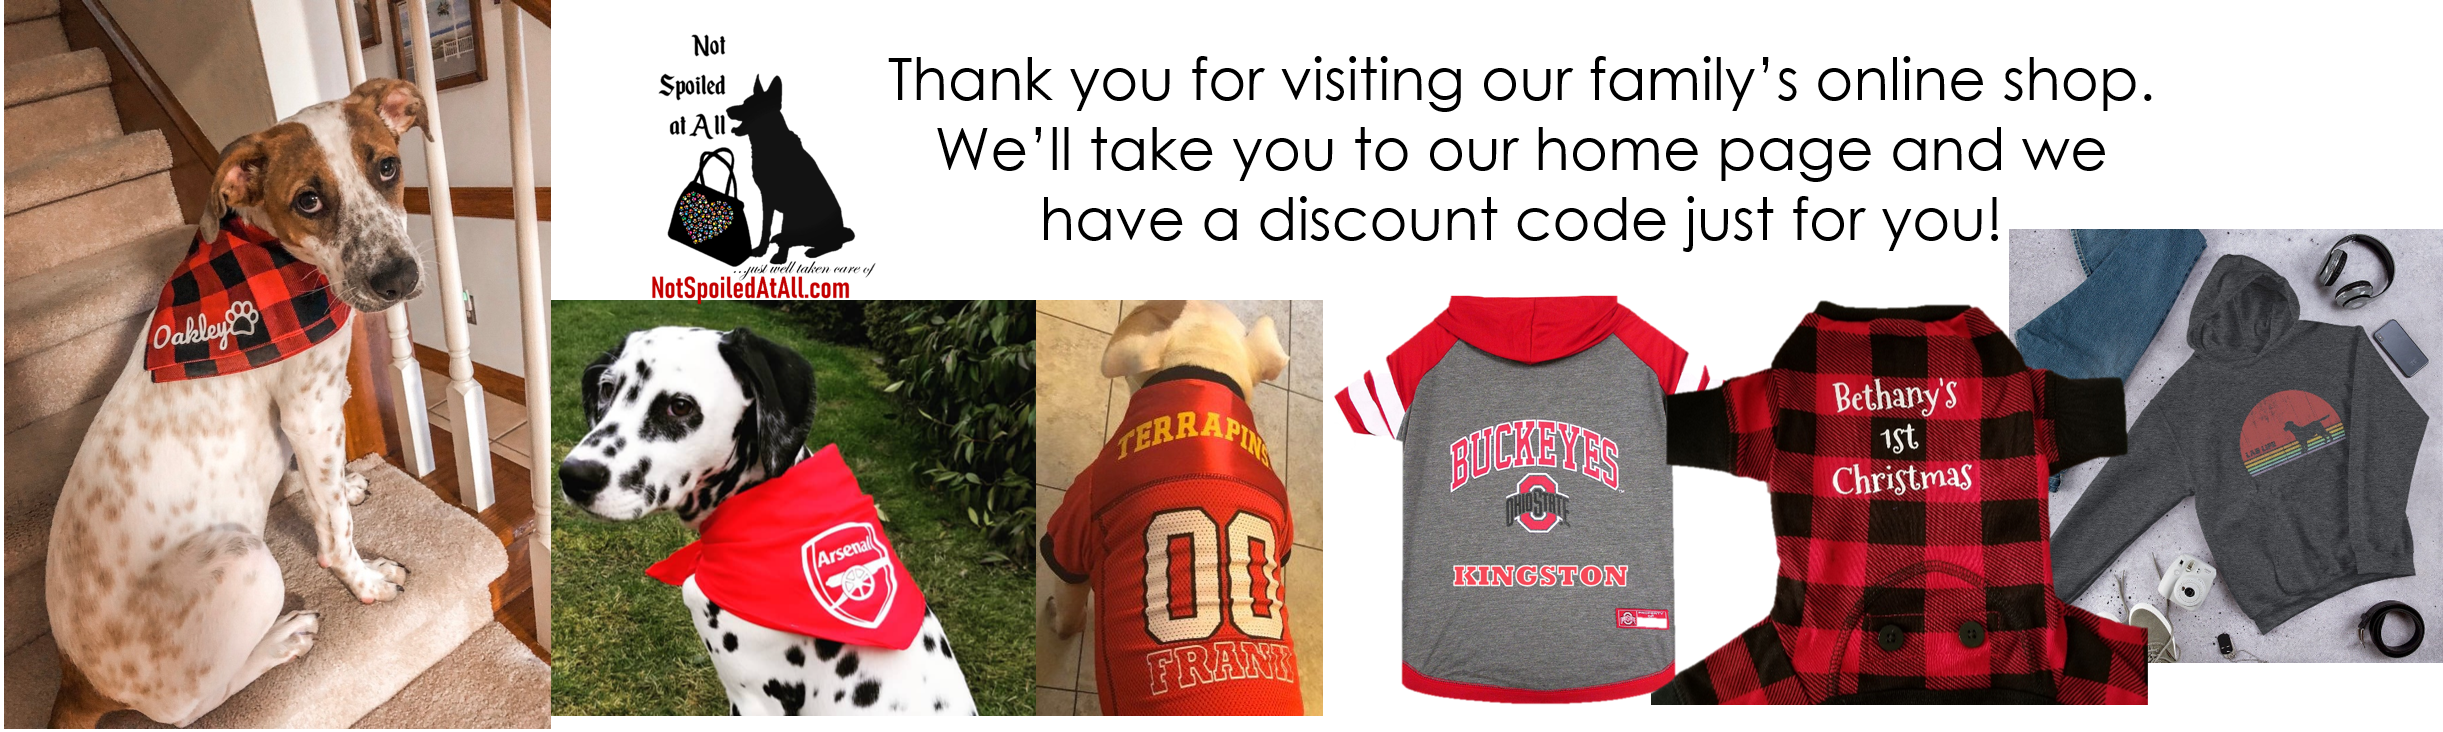 marine corps dog clothes Archives - Premium Pet Store in Nepal Online Dog  Shop in Nepal - Dog Foods, Dogs Clothes